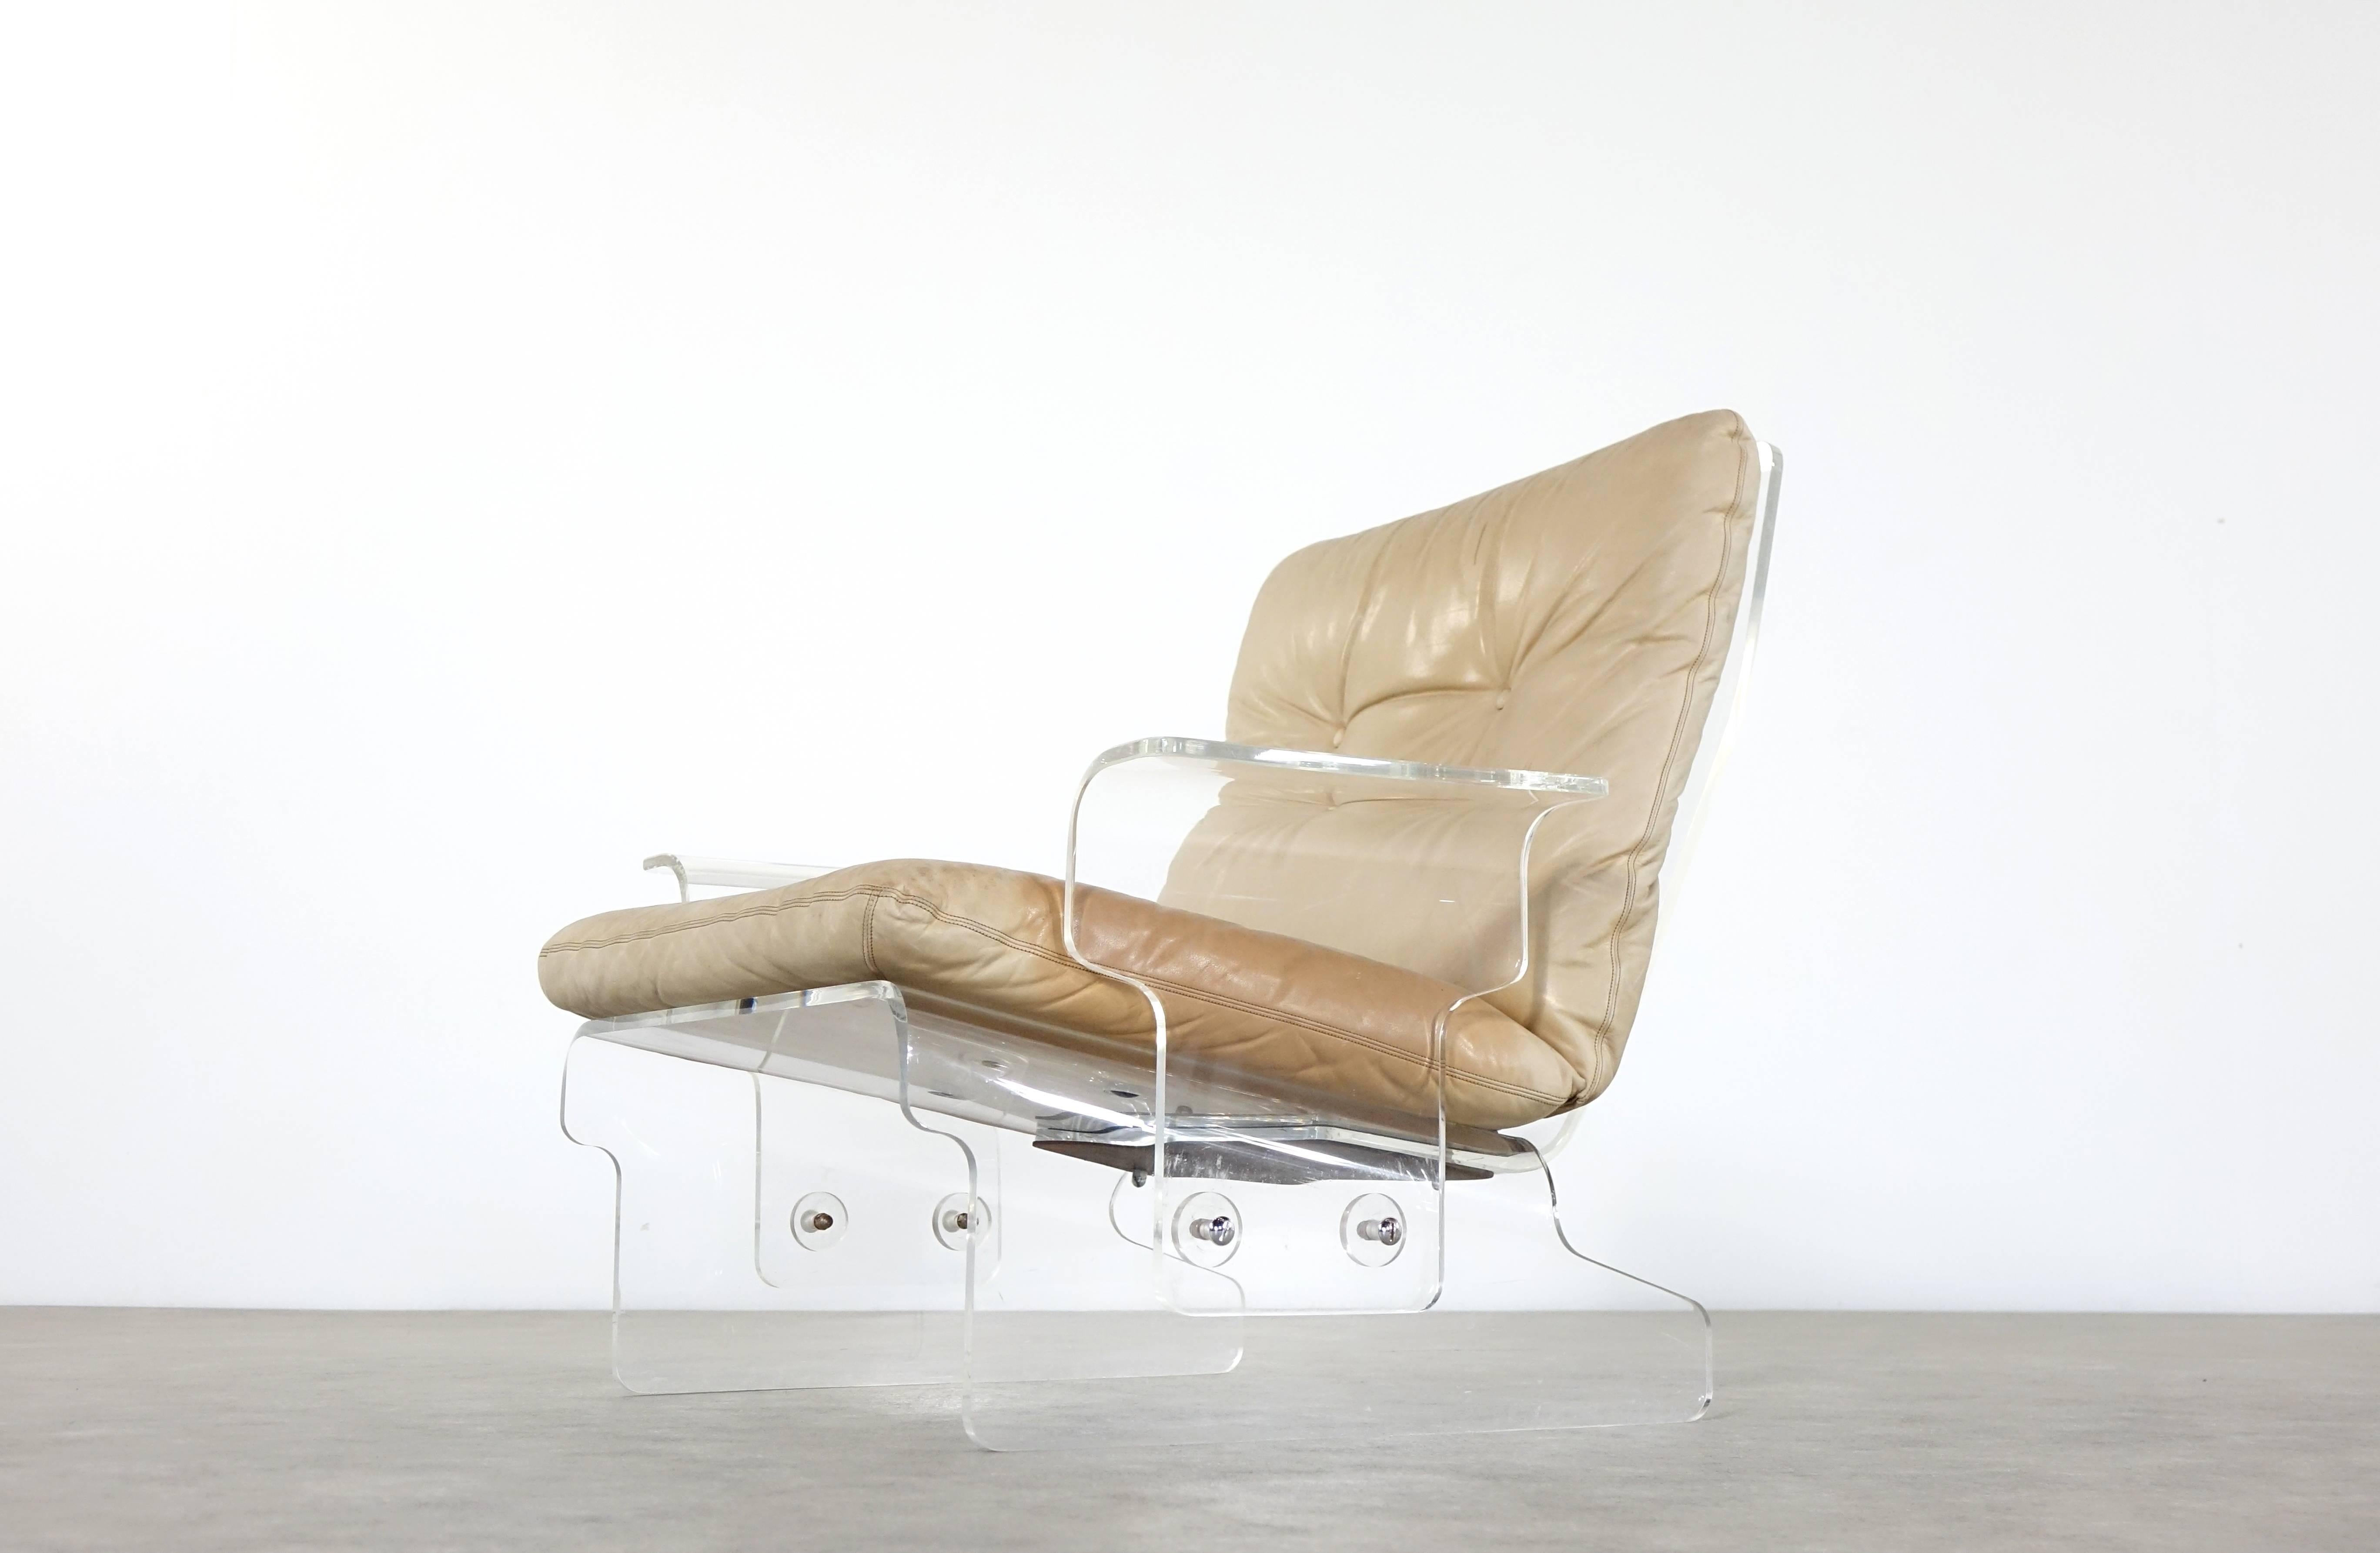 Two extremely rare 1966 lounge chairs by Baumann, Germany.
Highly comfortable! The acrylic parts are in very nice condition, no cracks, just some scratches with all these years.

The back and bottom cushions in nicely bleached cognac leather are